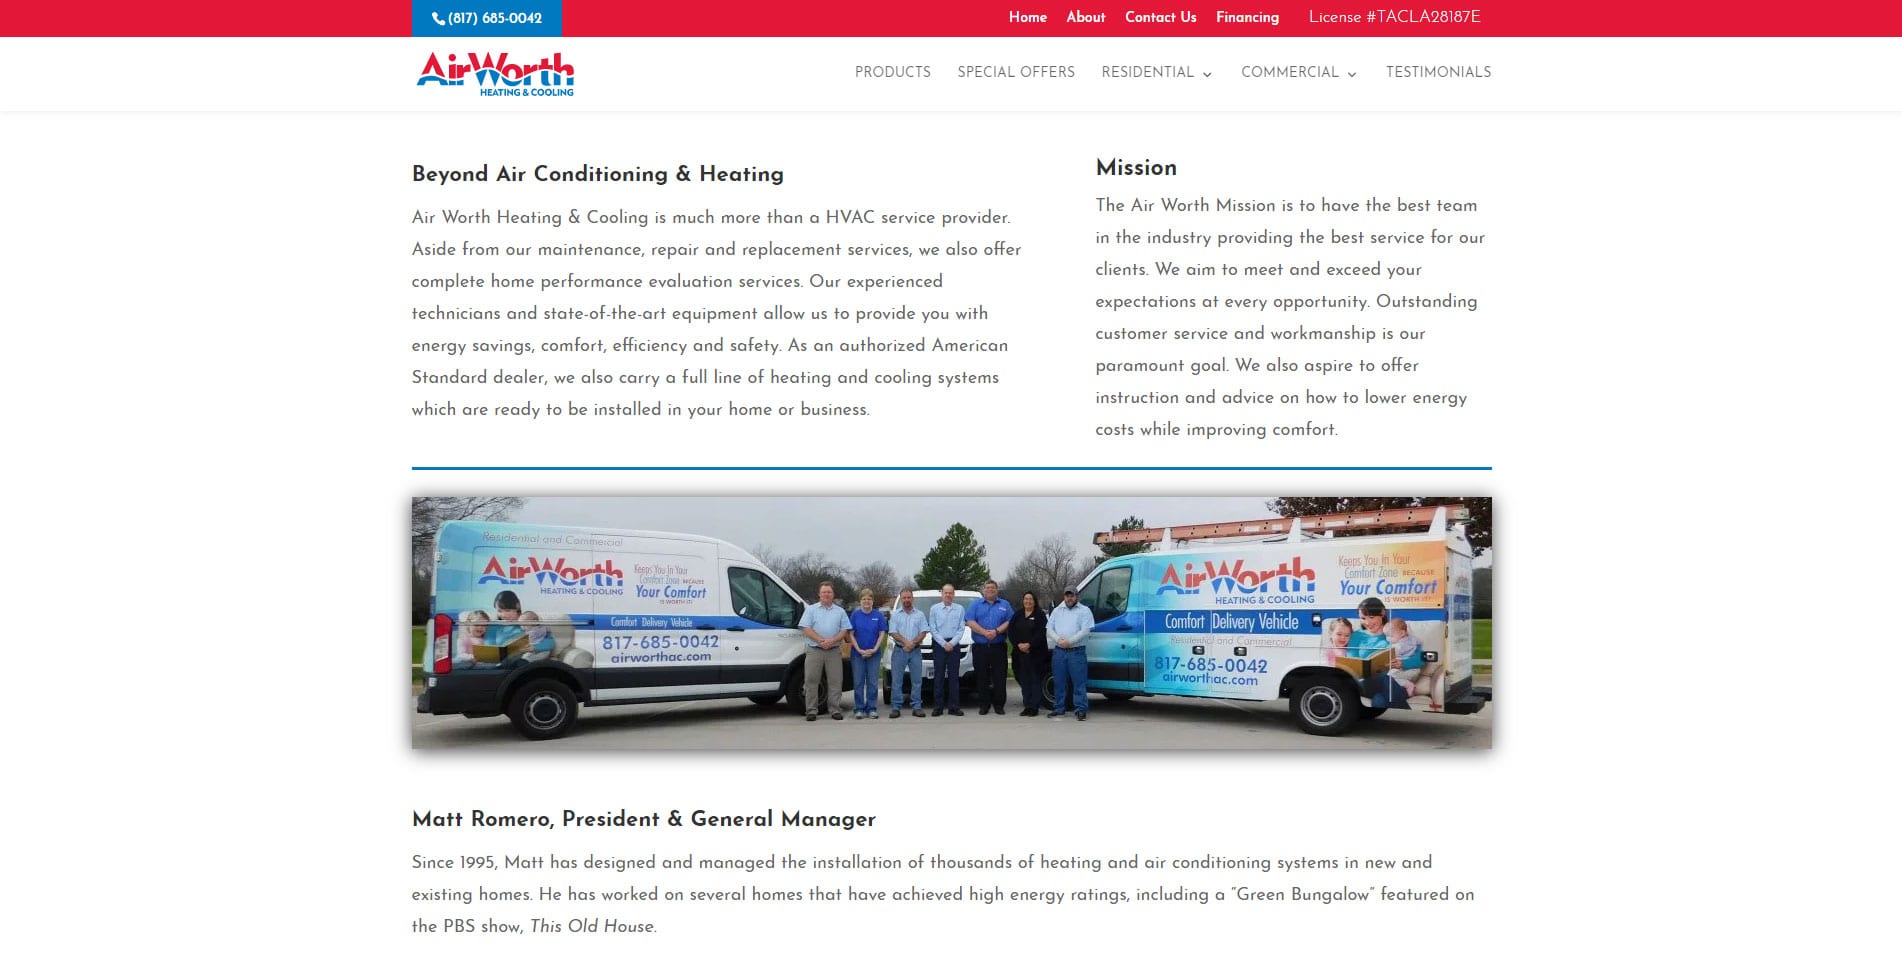 AirWorth About Us Page